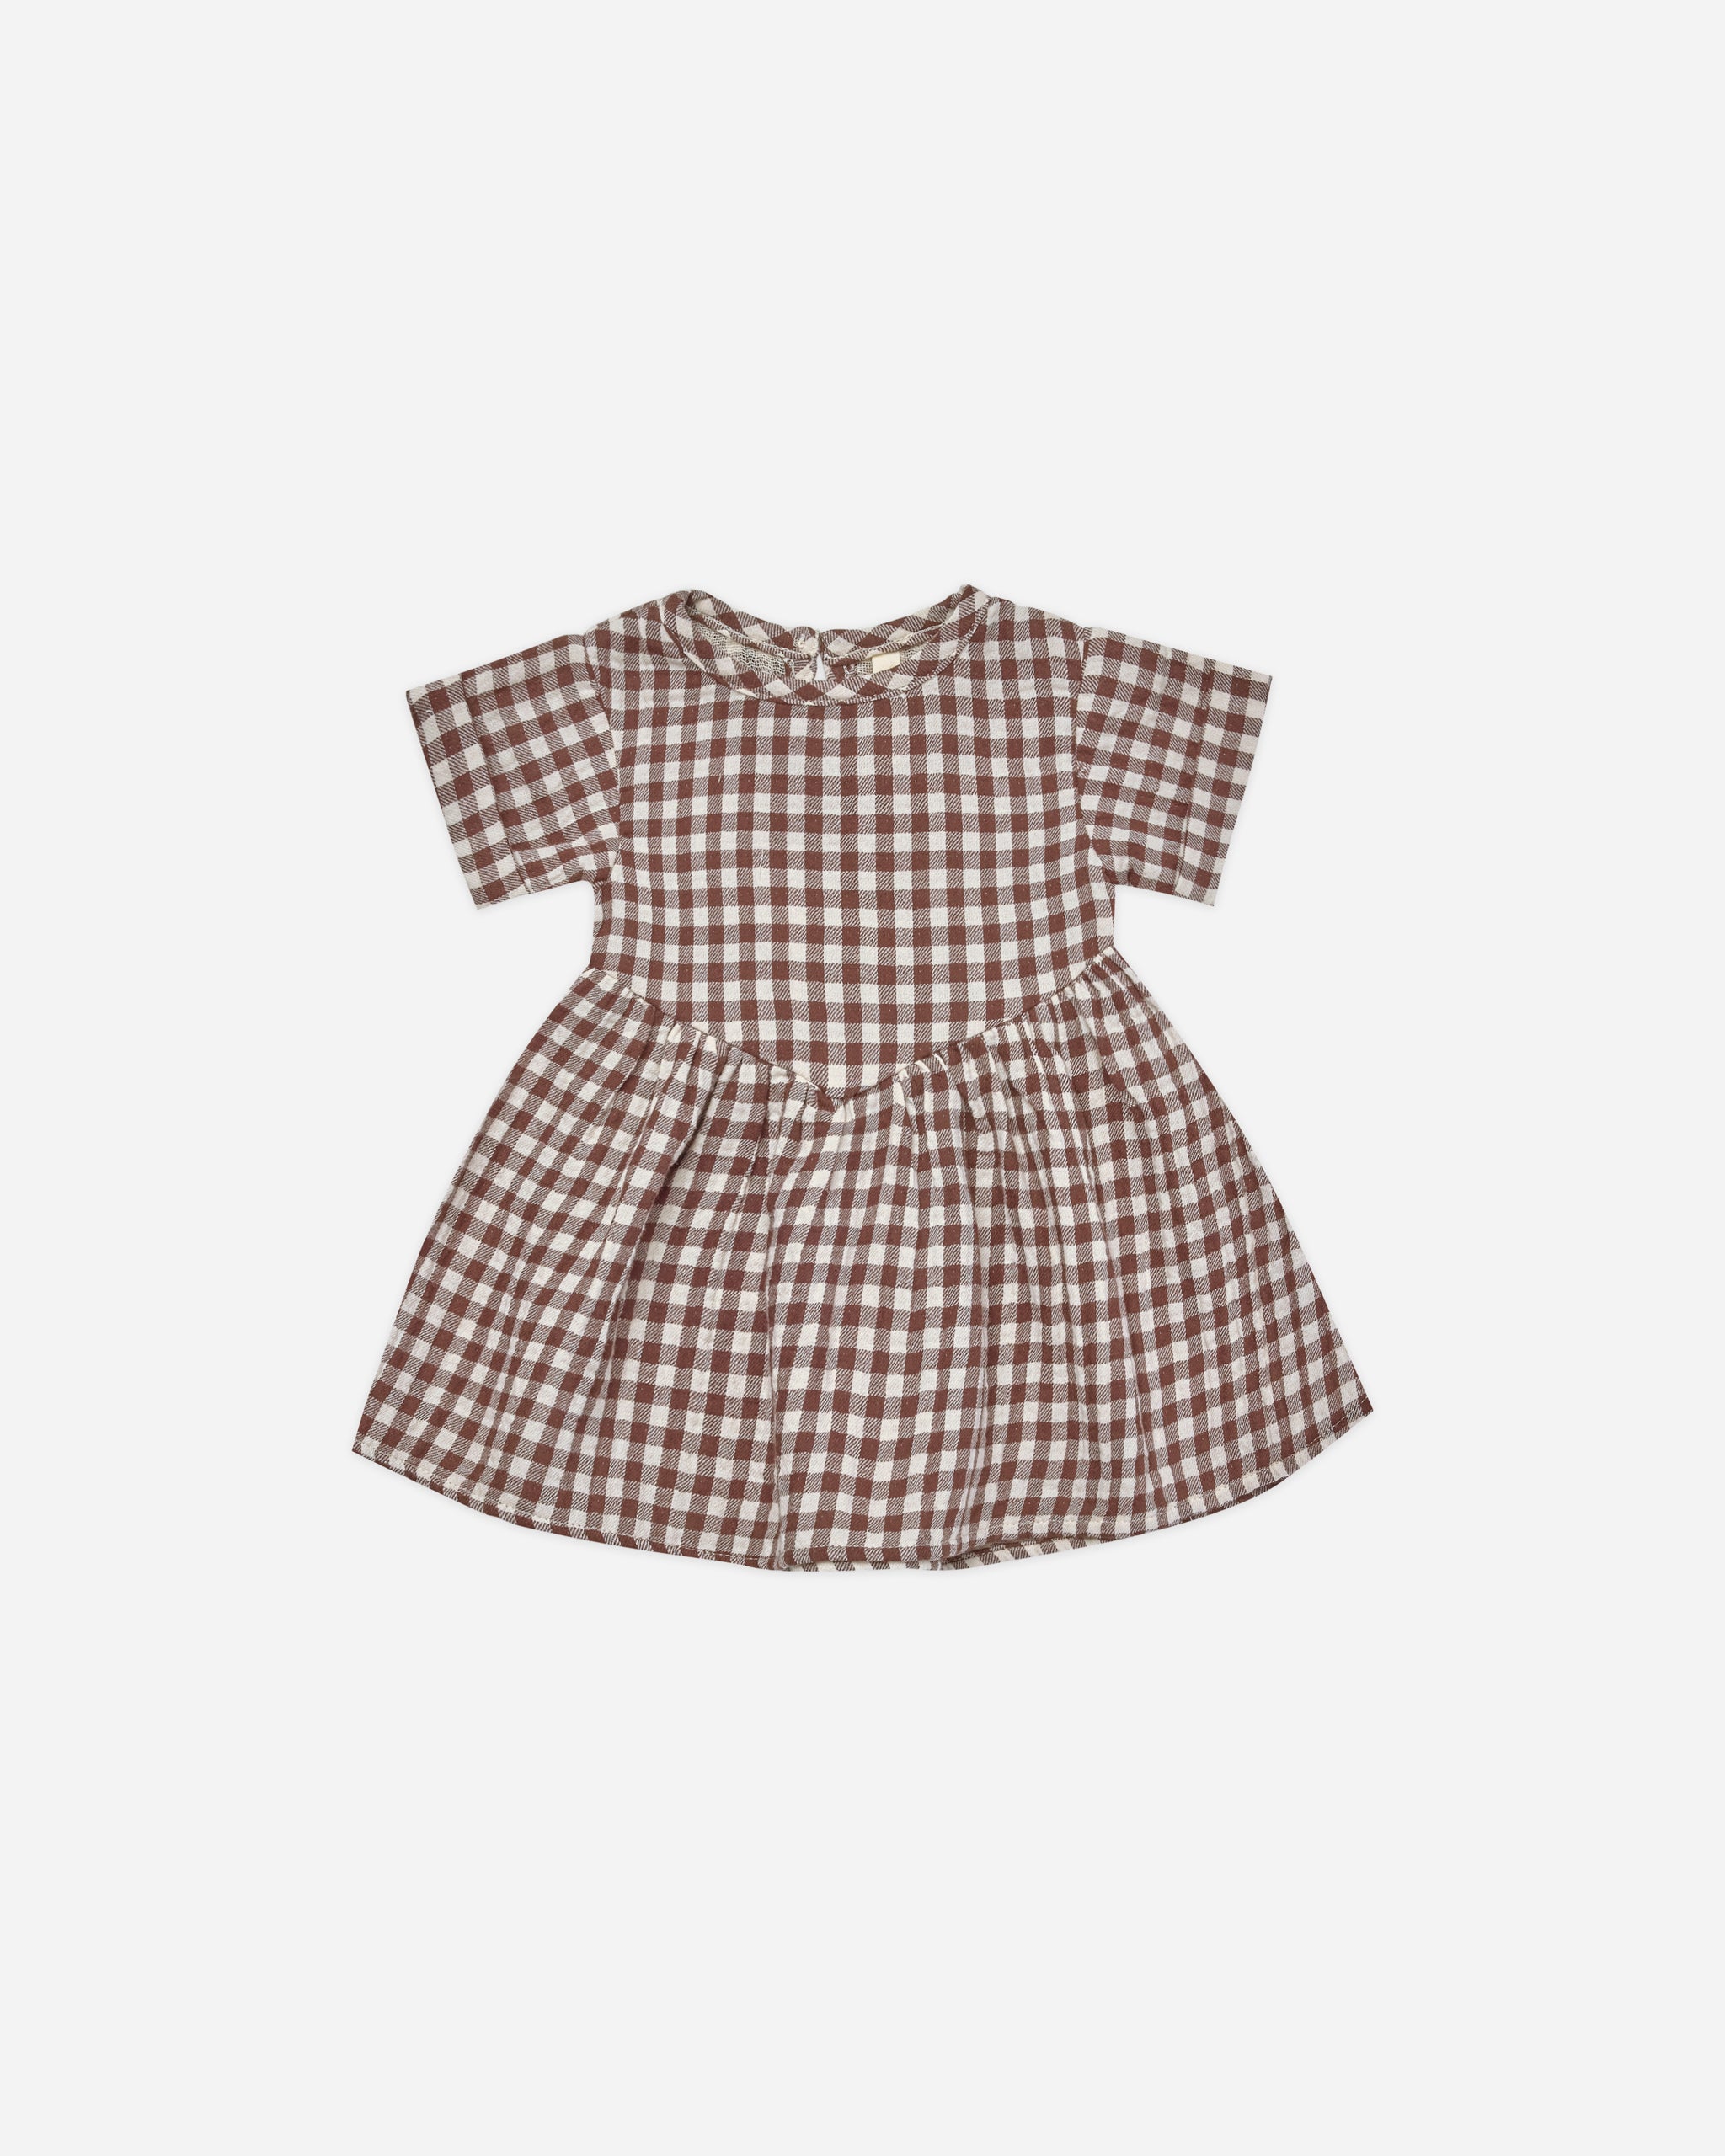 Brielle Dress || Plum Gingham - Rylee + Cru | Kids Clothes | Trendy Baby Clothes | Modern Infant Outfits |